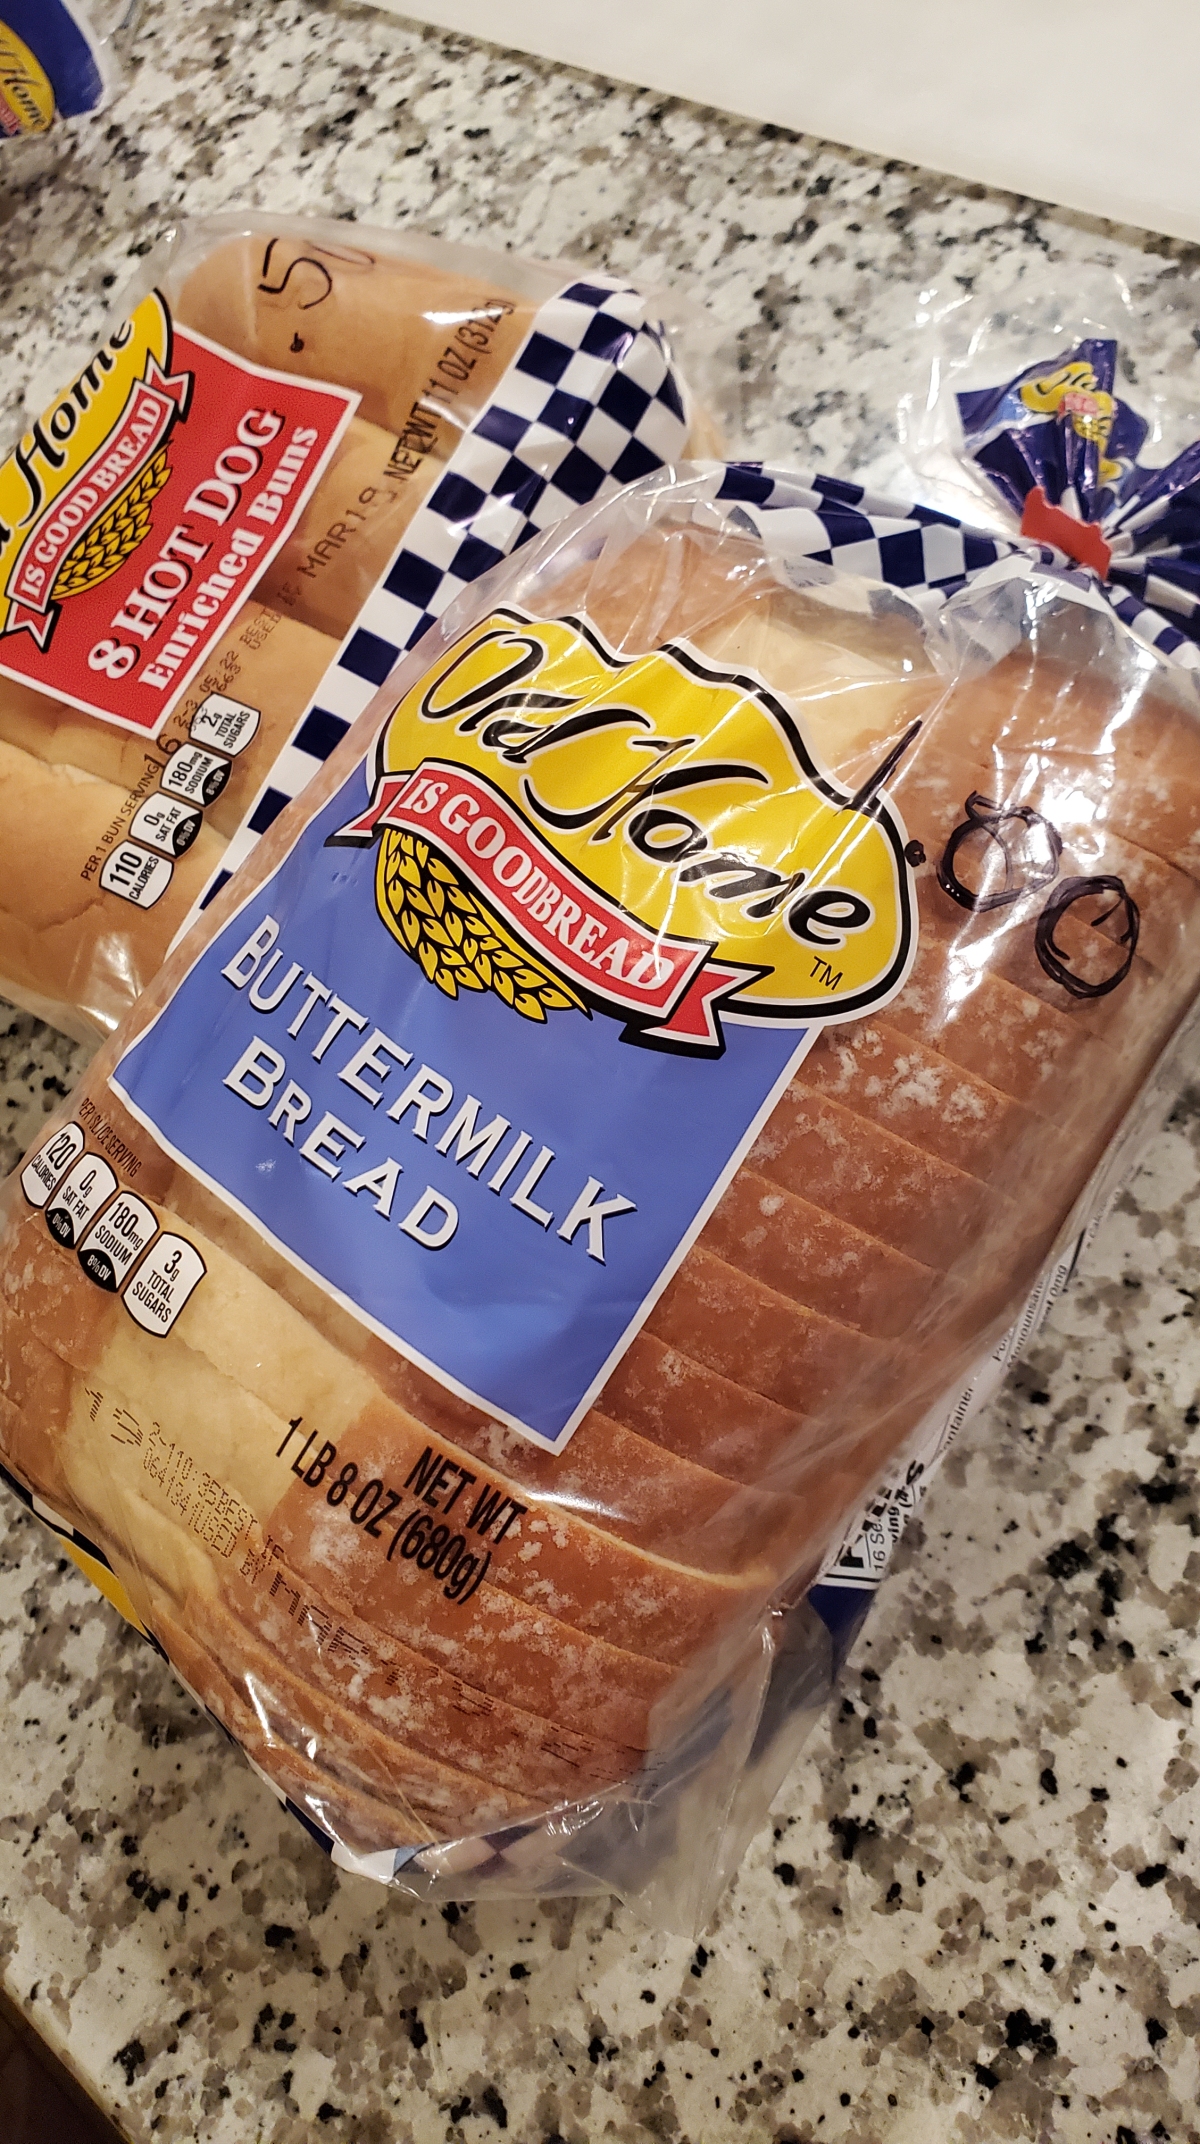 The $1,000 Loaf of Bread; Or, I’m a New Policy